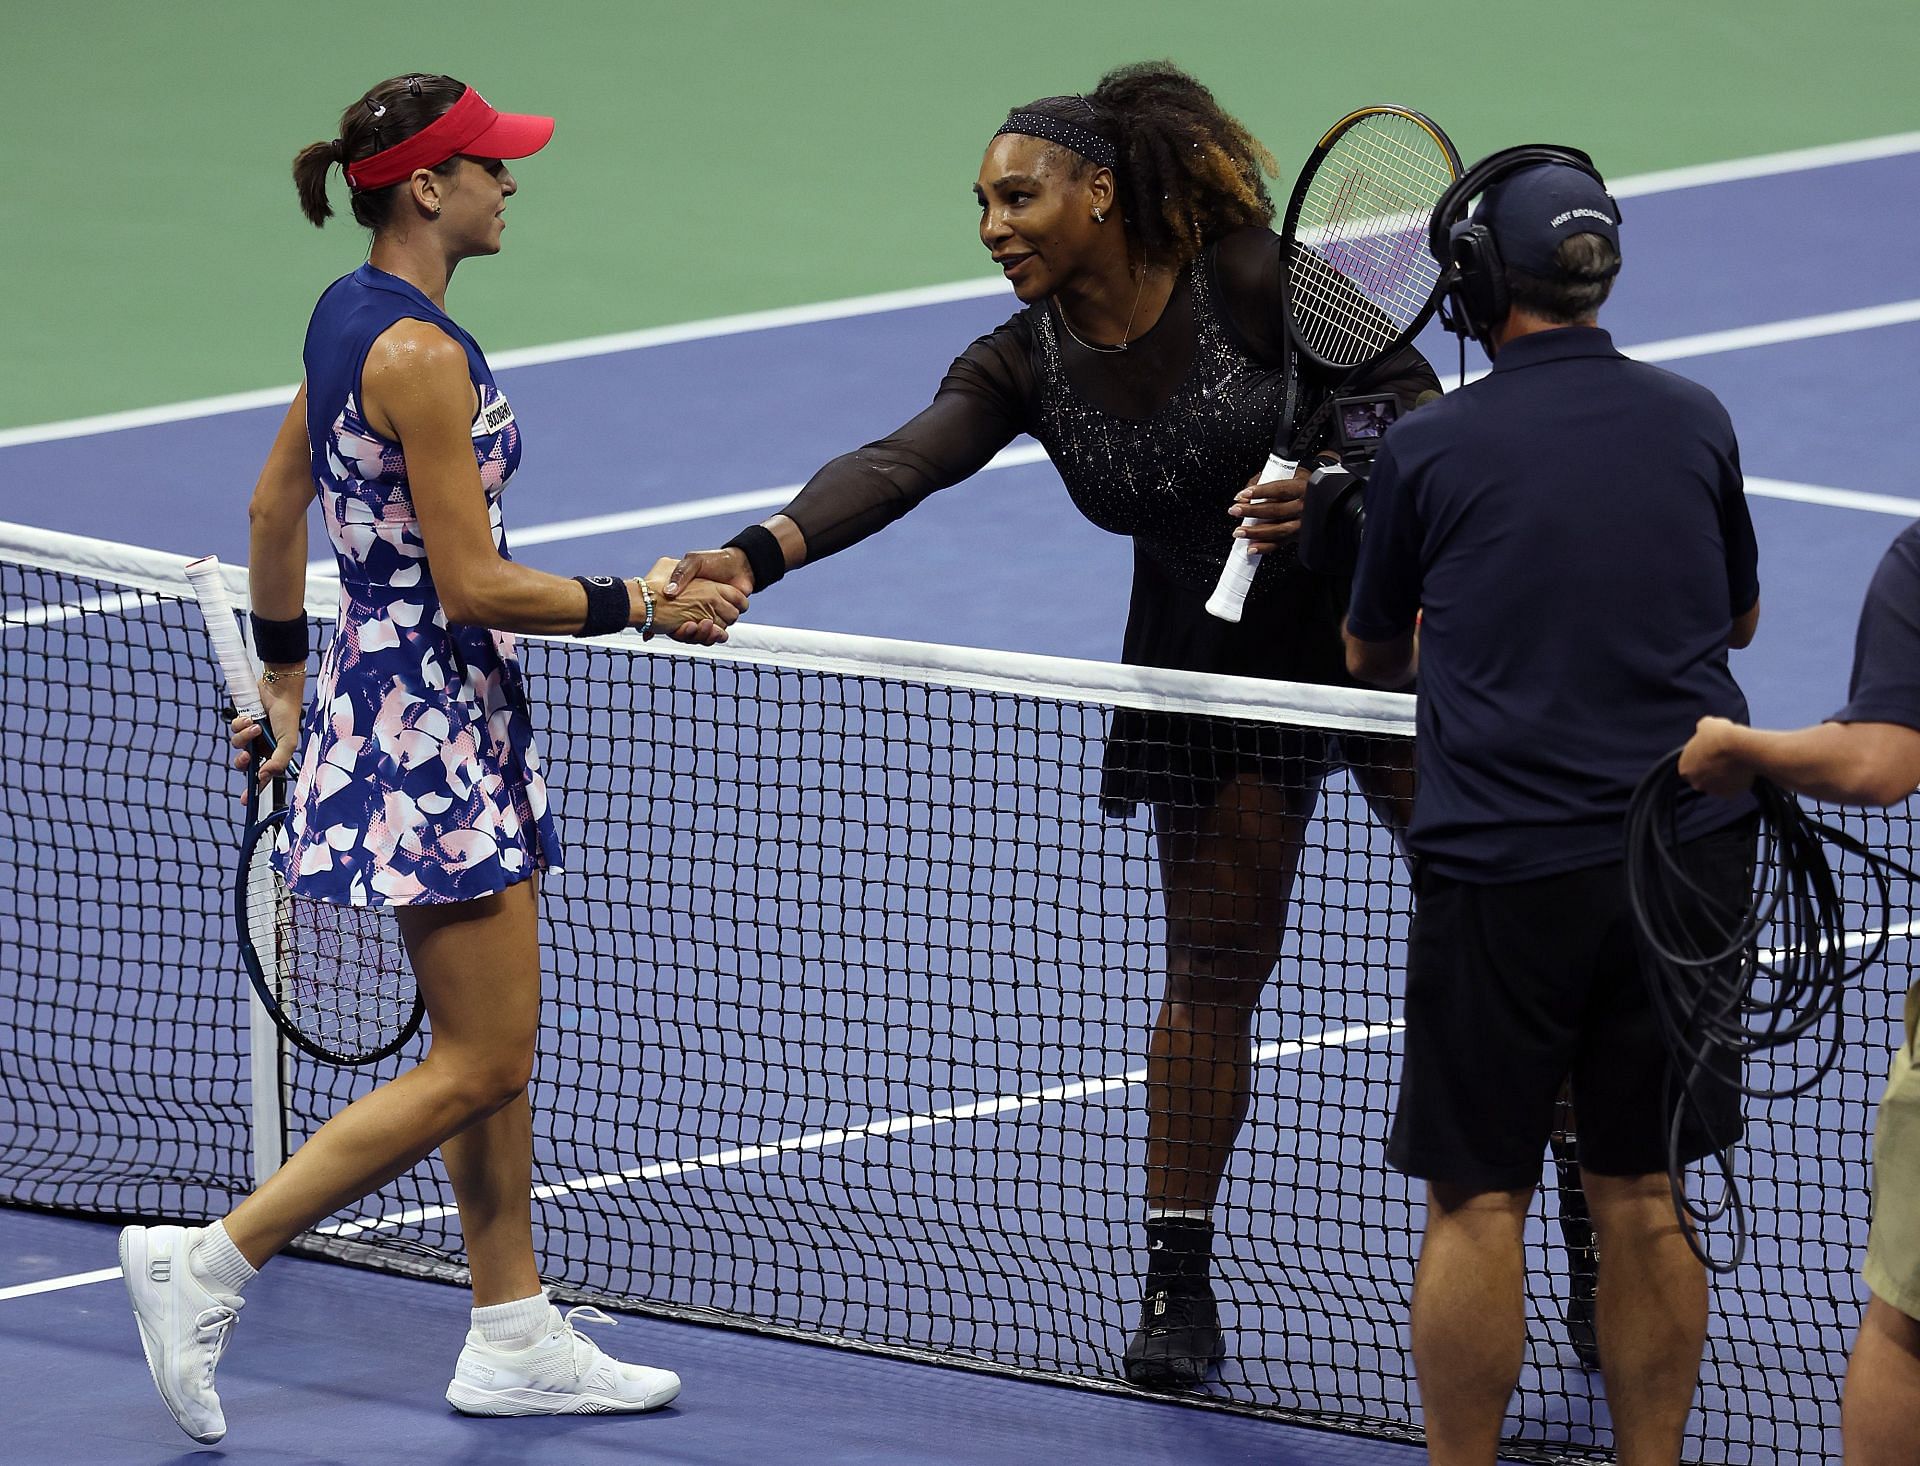 Ajla Tomljanovic beat Serena Williams in the third round of the US Open